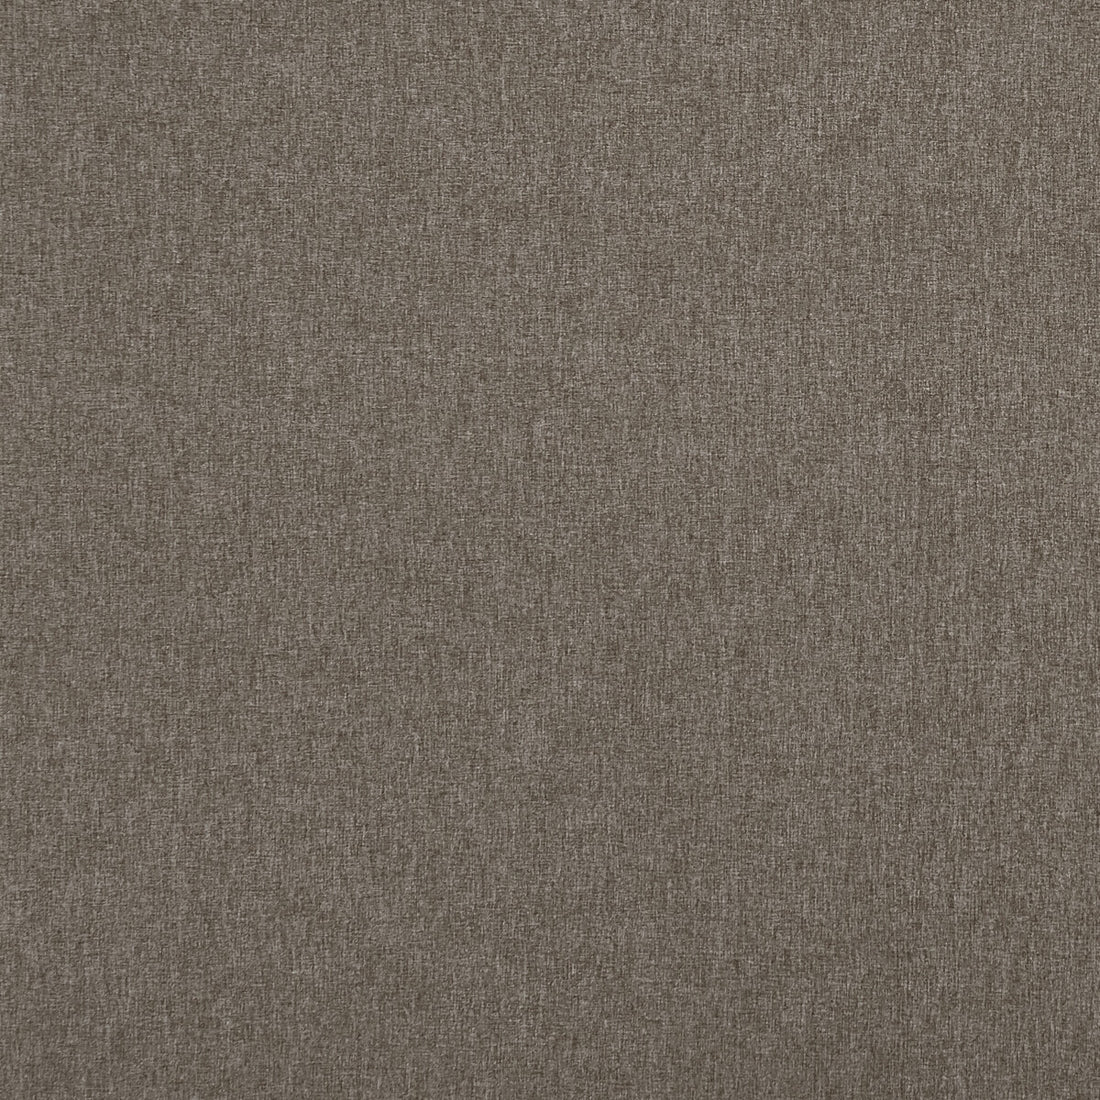 Highlander fabric in mocha color - pattern F0848/19.CAC.0 - by Clarke And Clarke in the Clarke &amp; Clarke Highlander collection